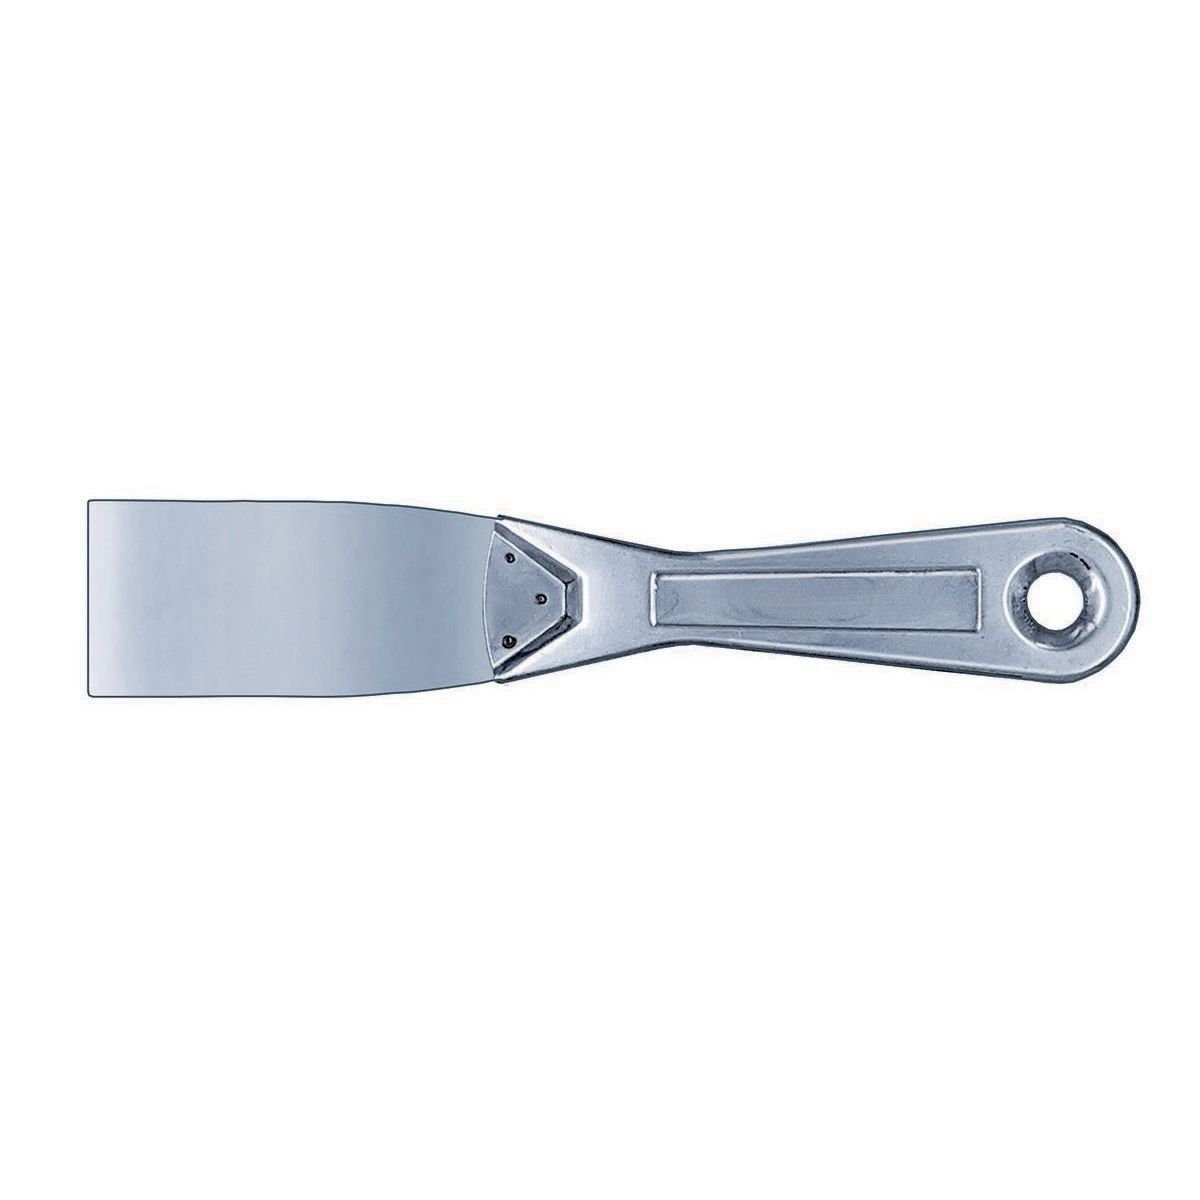 UX2F) 2” One-Piece Stainless Steel Pro Putty Knife, Labelled » ALLWAY® The  Tools You Ask For By Name